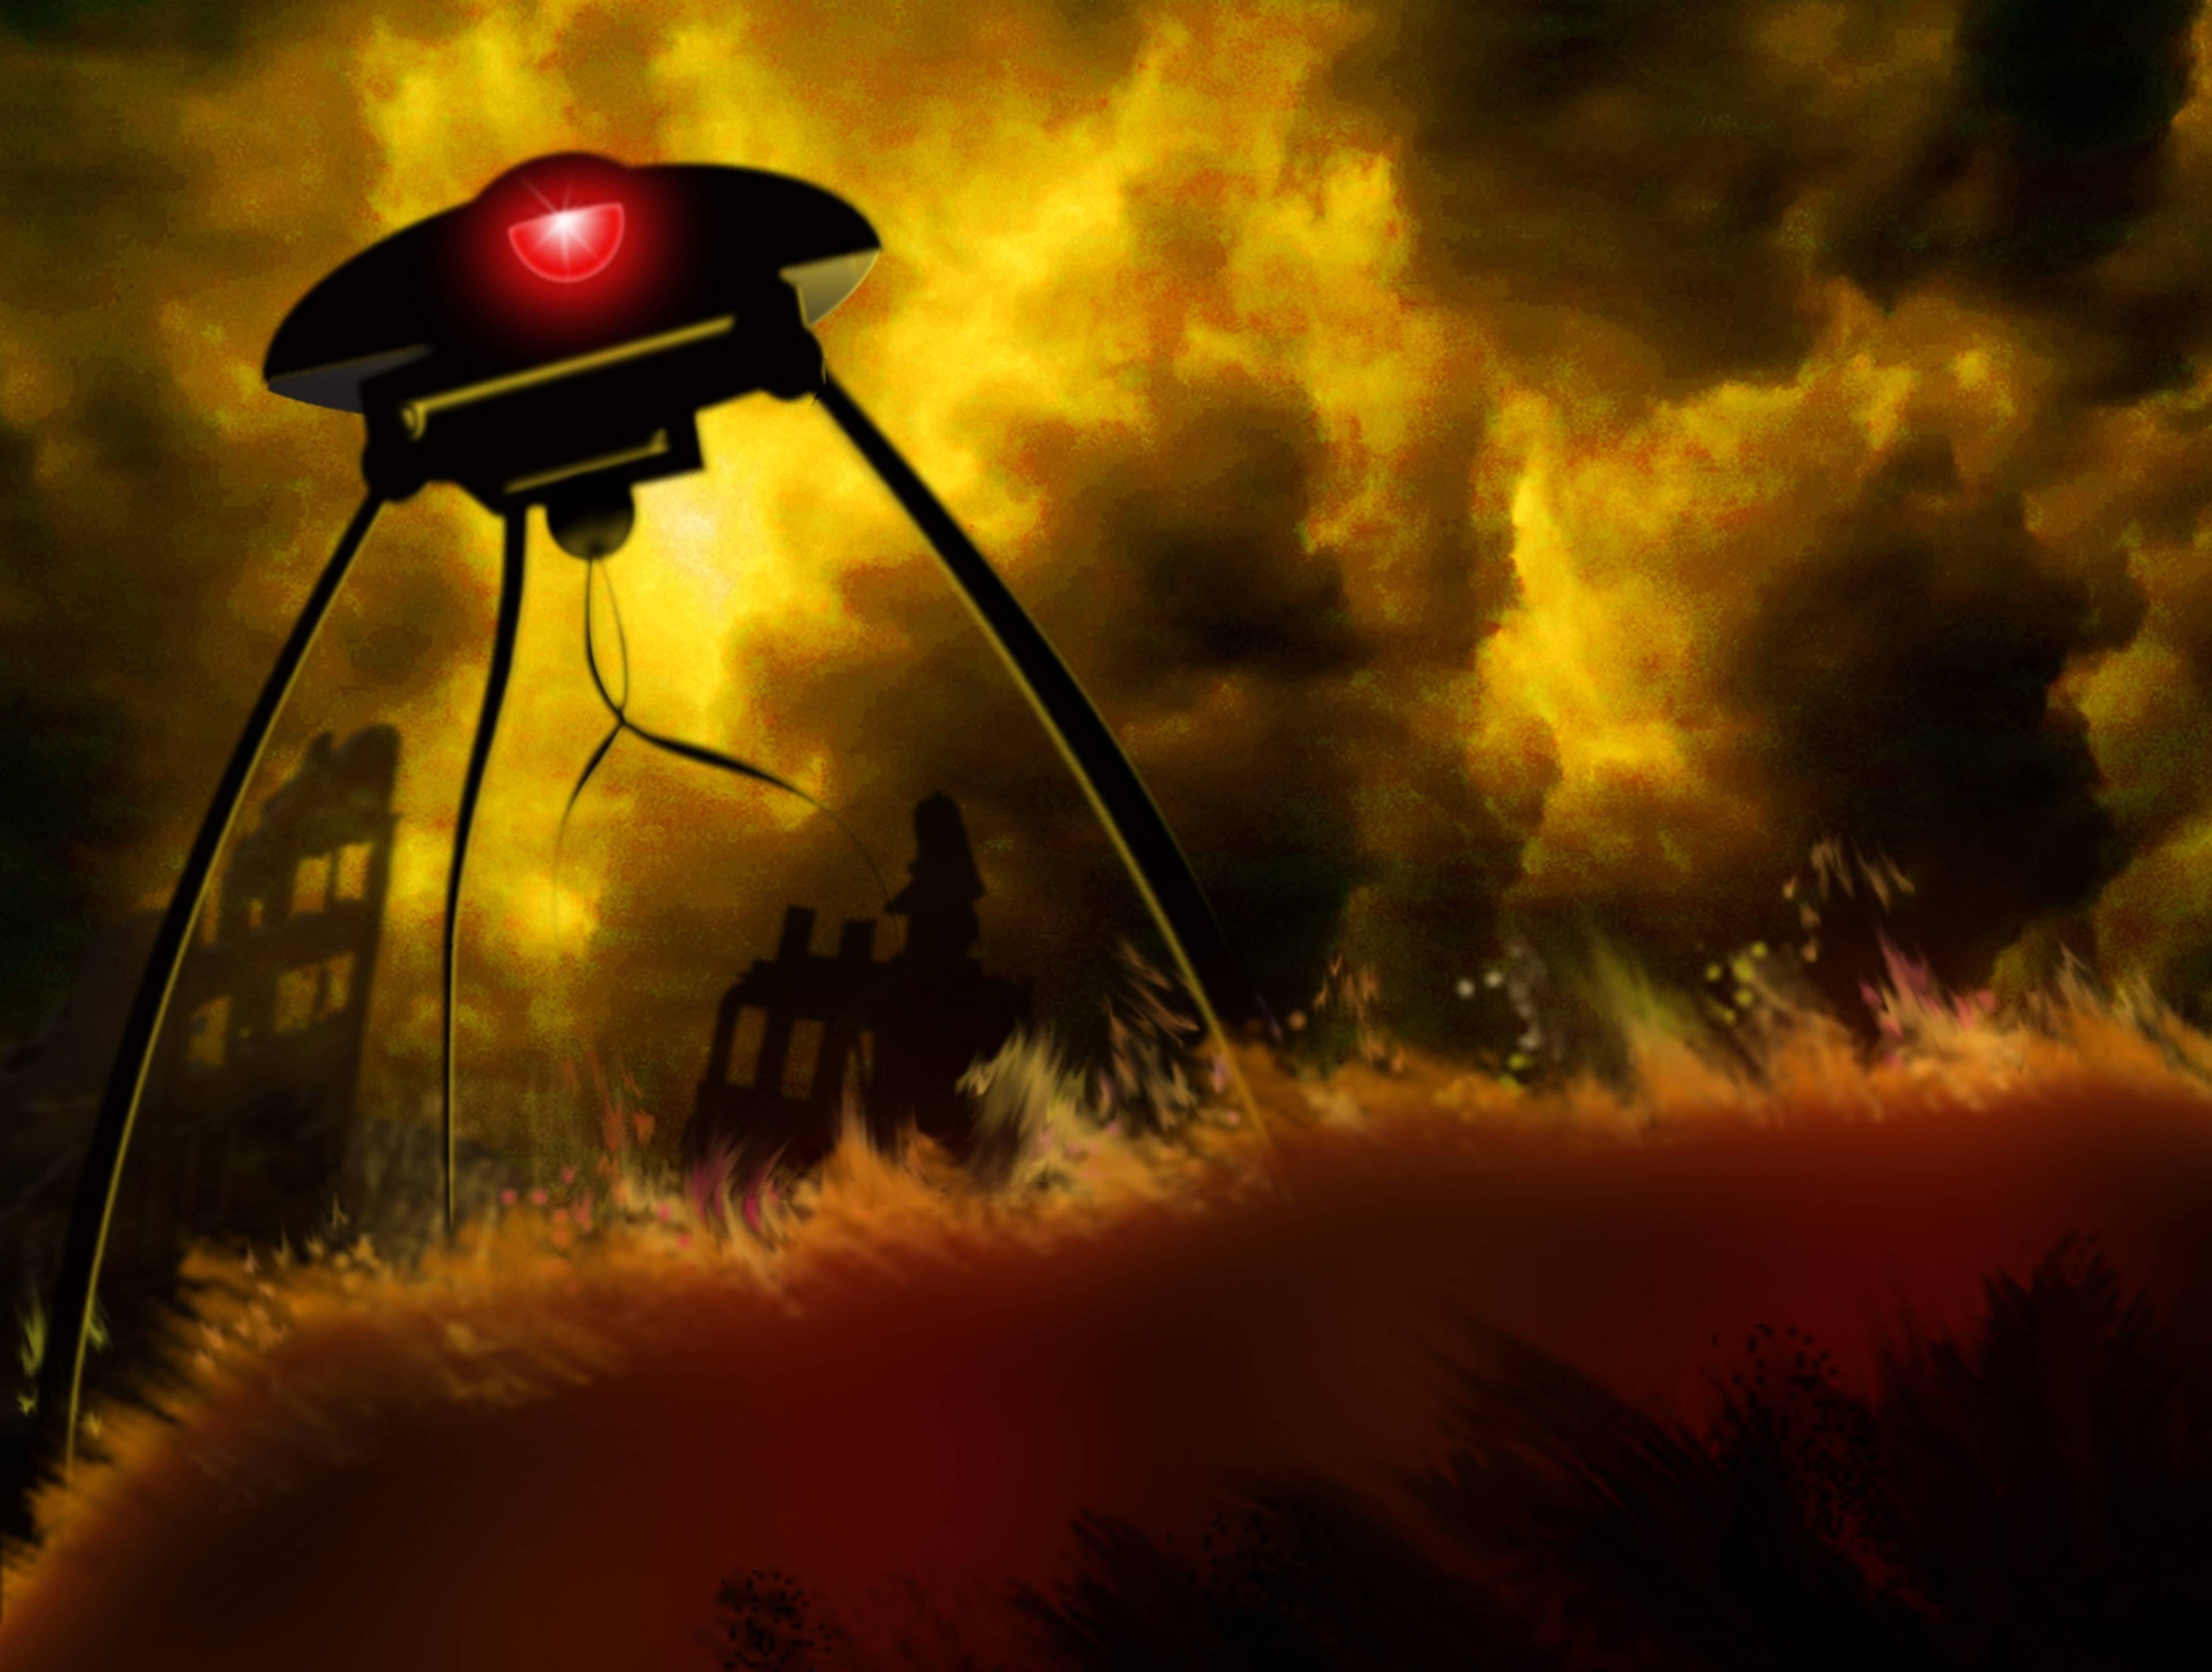 "War of the Worlds" by Orson Welles